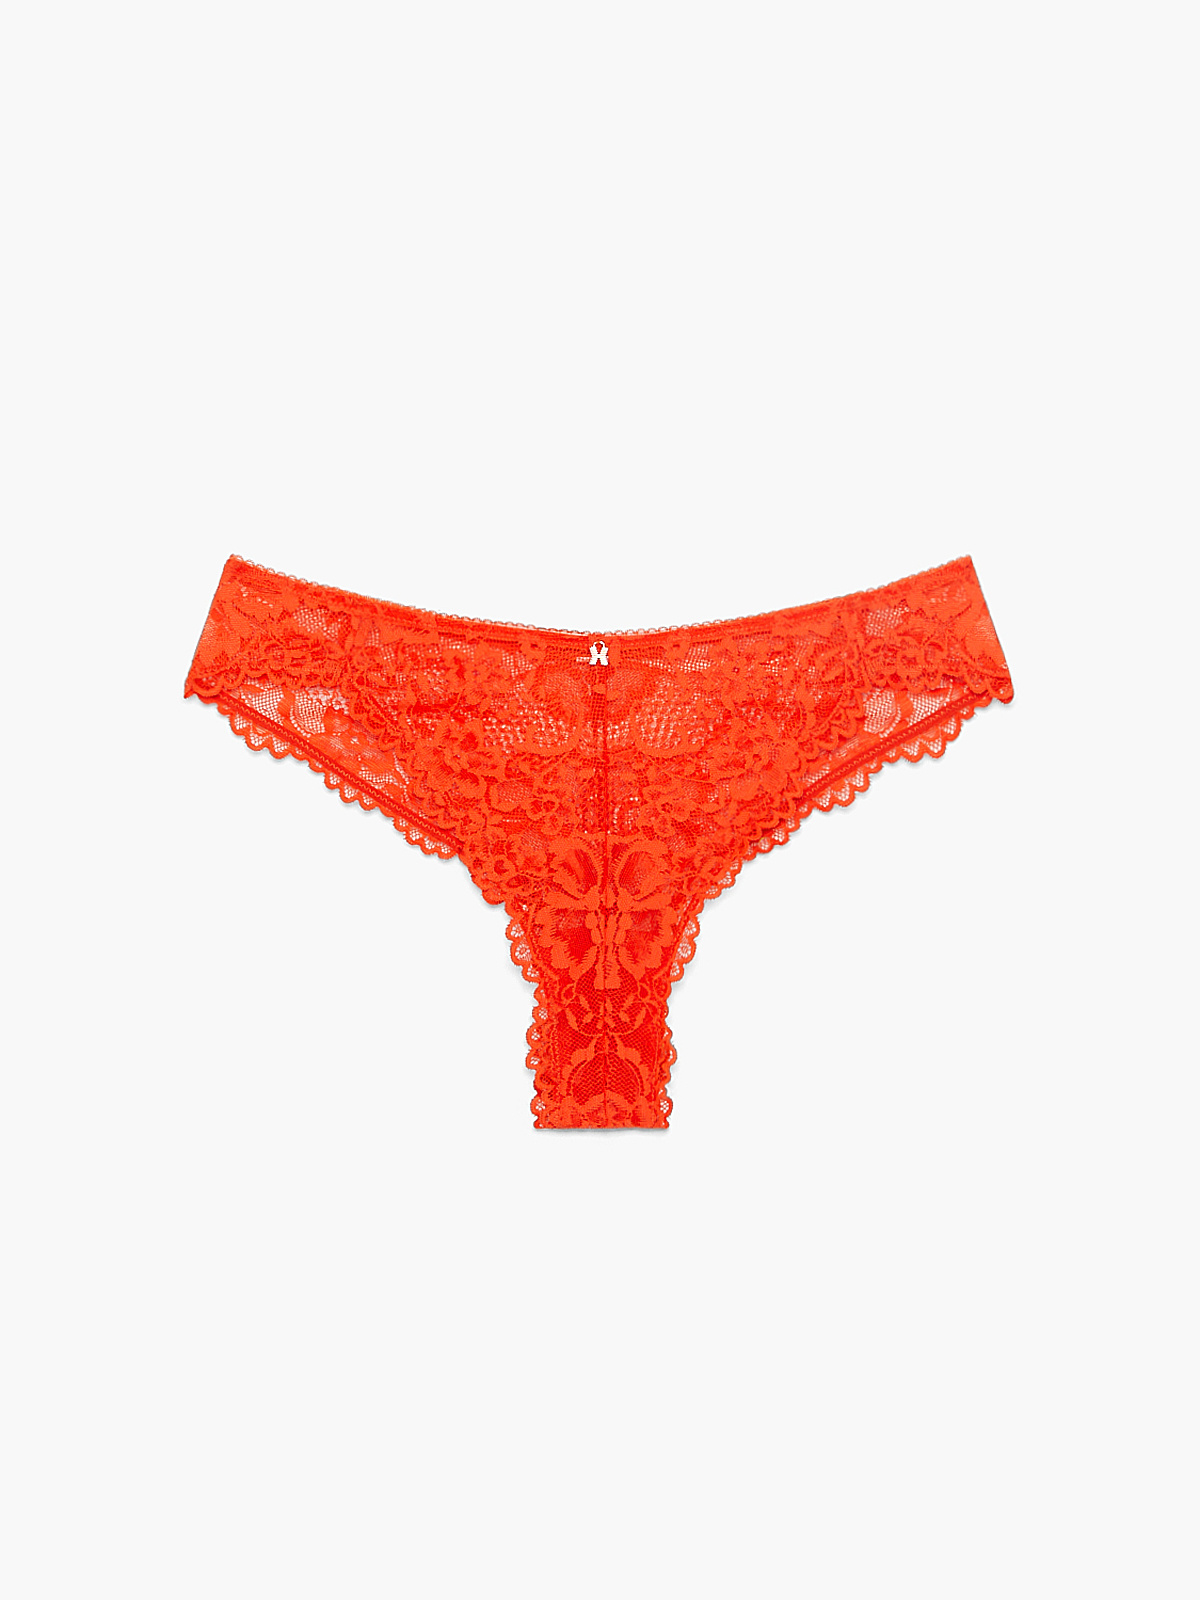 Floral Lace High-Leg Brazilian Panty in Red | SAVAGE X FENTY